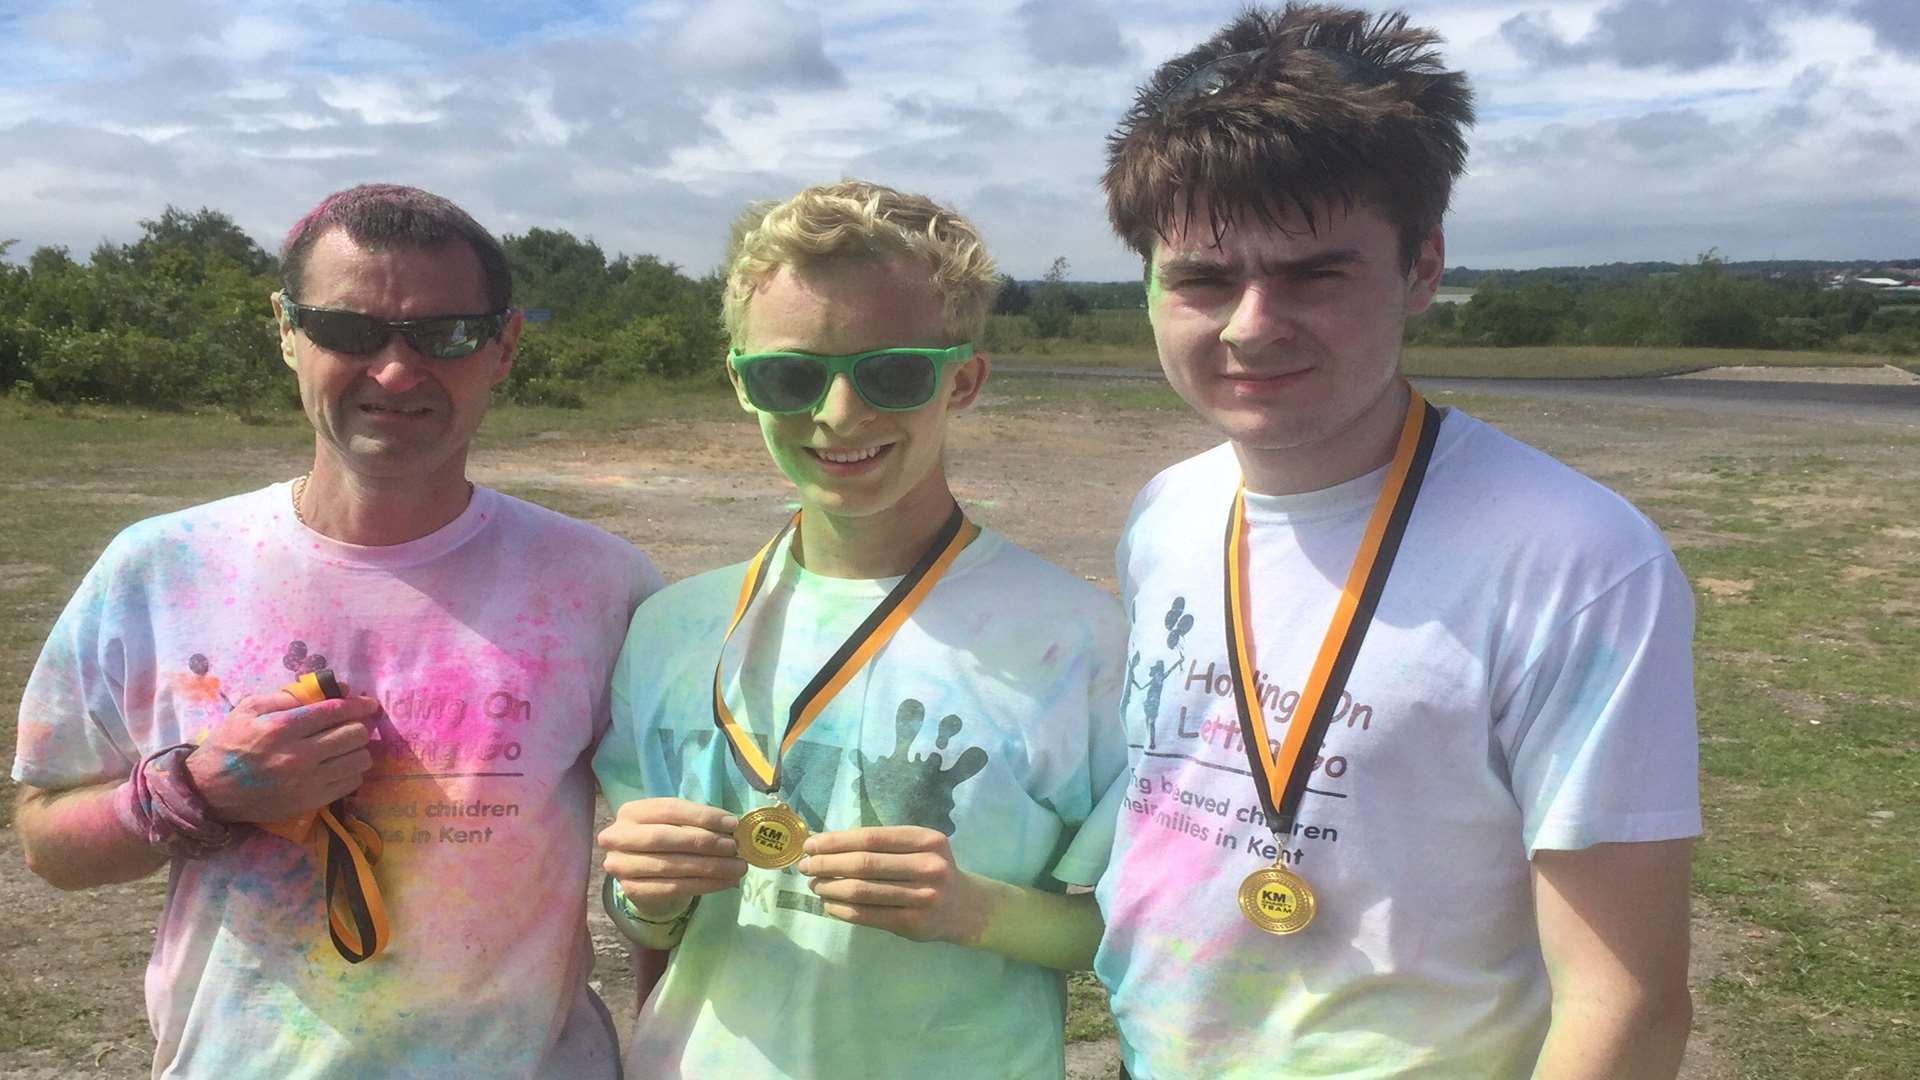 Winner Oliver Richards (centre), 15, from Whitstable, with (left) Steve Jarvis, 44, from Dartford who took third place and his son Michael, 20, (right) who took second place at the KM Colour Run.